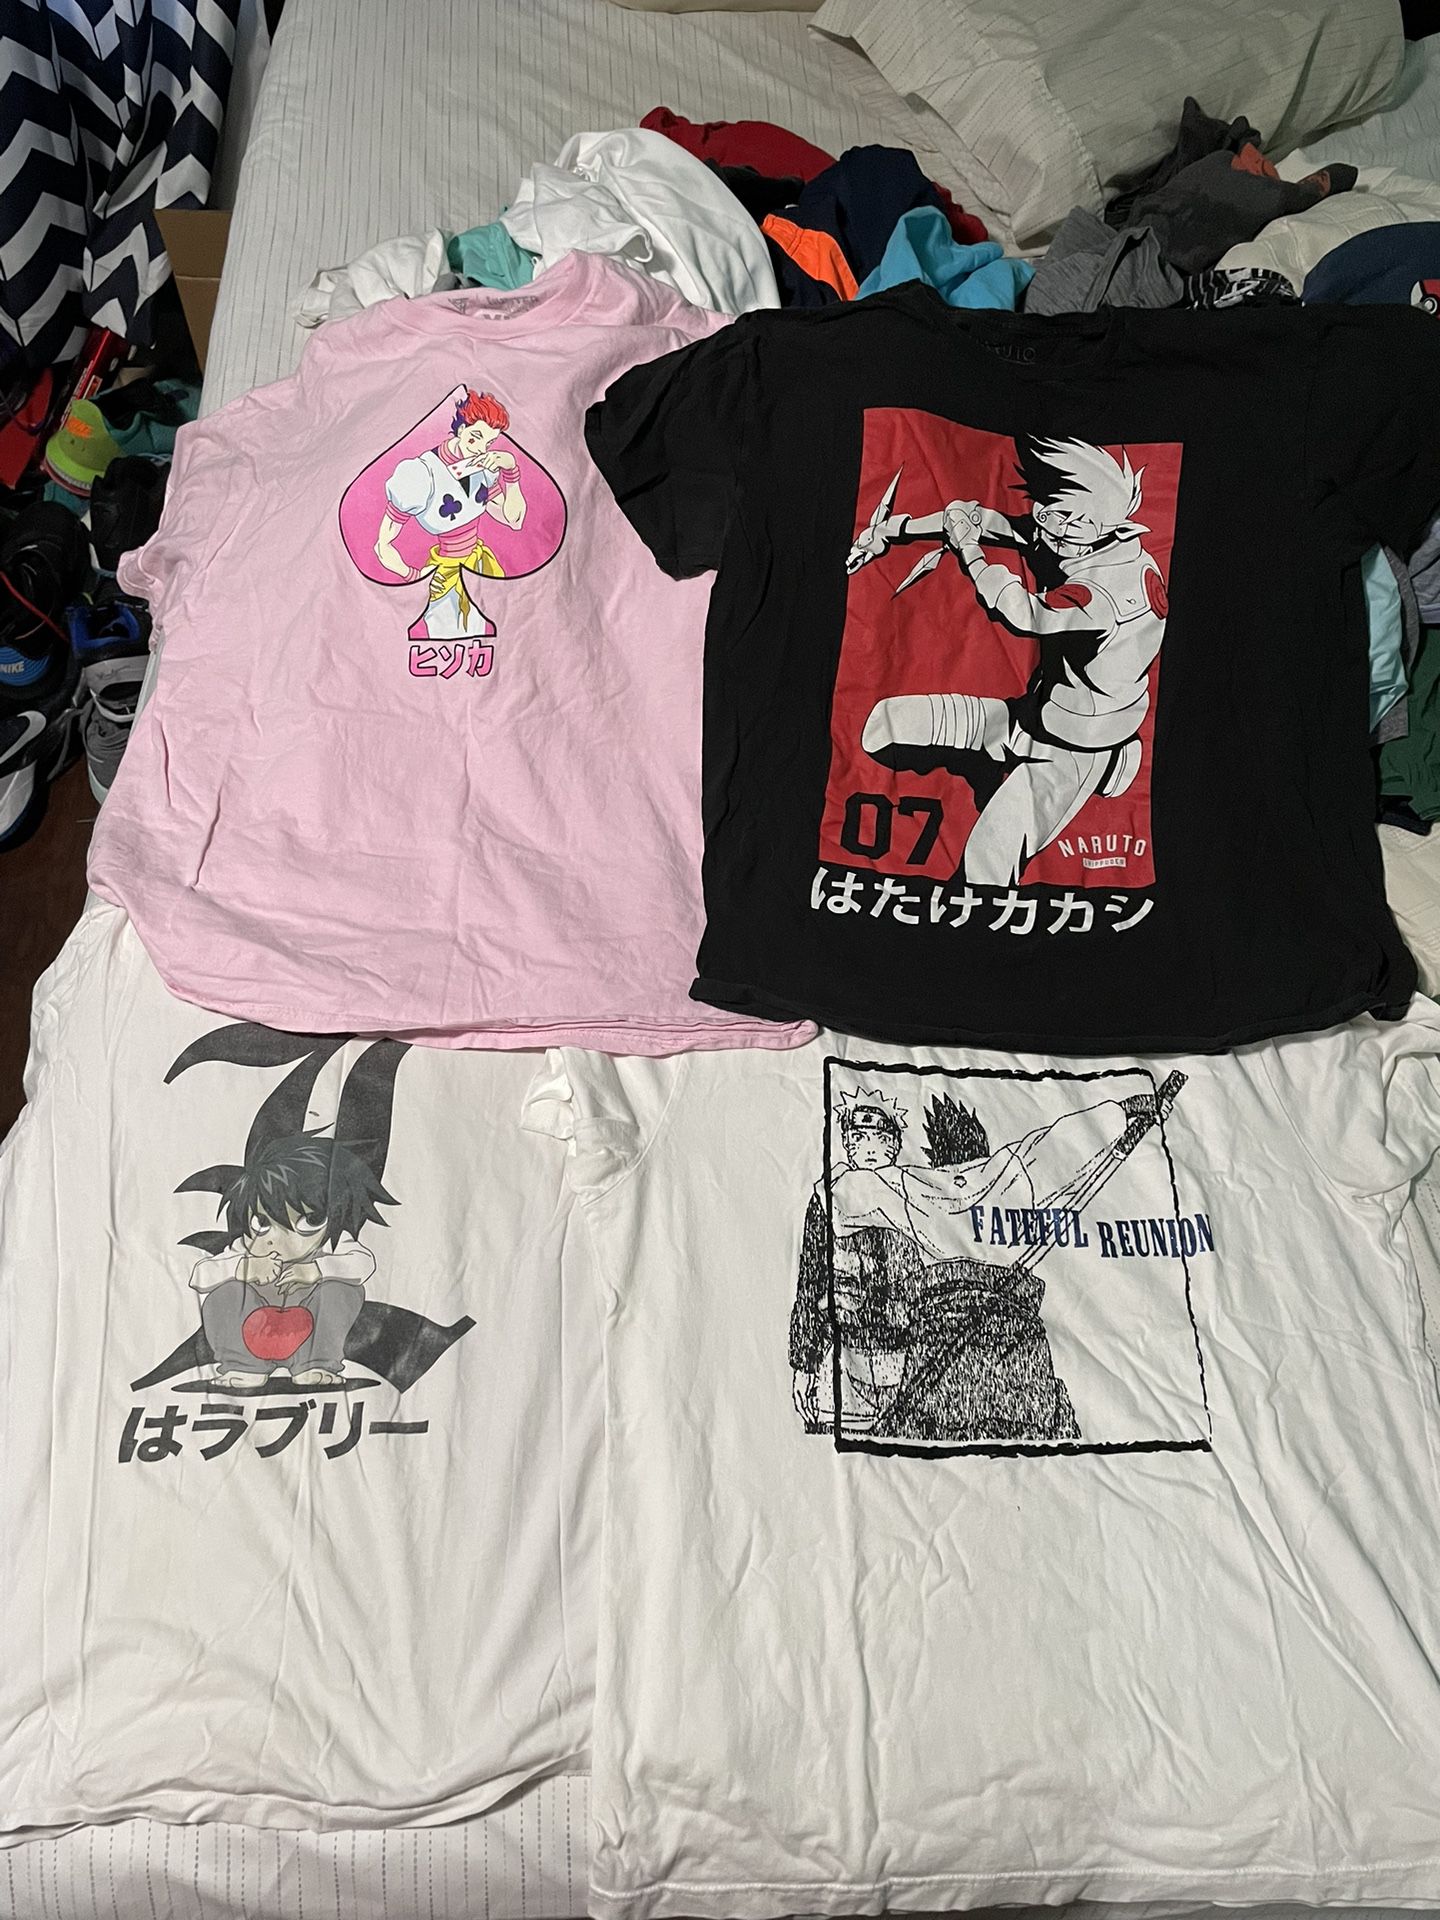 Anime Shirt Lot Of 4 (Naruto, Hunter X Hunter, Etc) Ranges From Large To XL